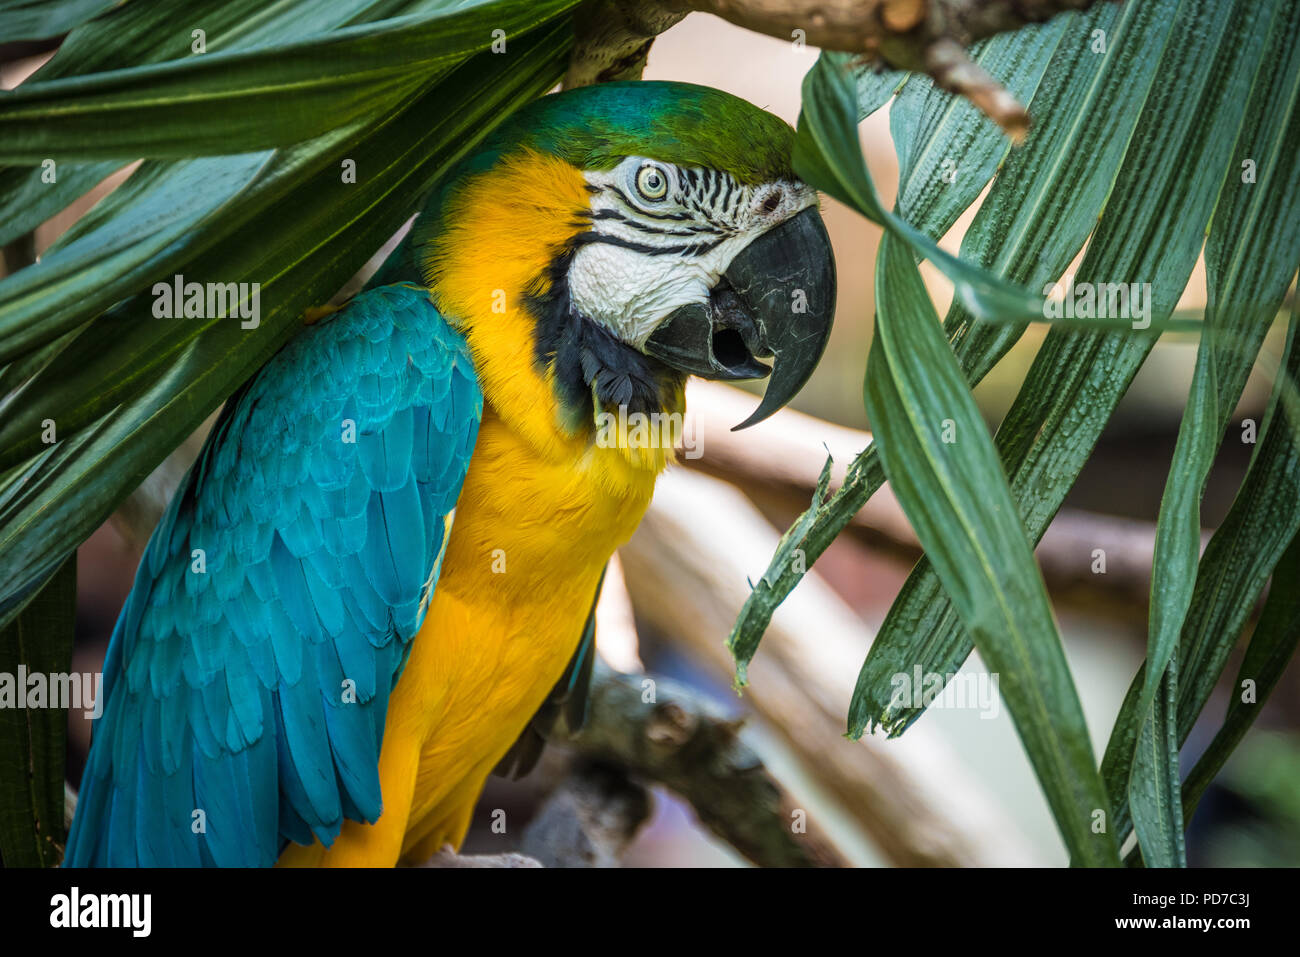 A colorful blue-and-yellow macaw (also known as a blue-and-gold macaw) at the St. Augustine Alligator Farm Zoological Park in St. Augustine, FL. (USA) Stock Photo